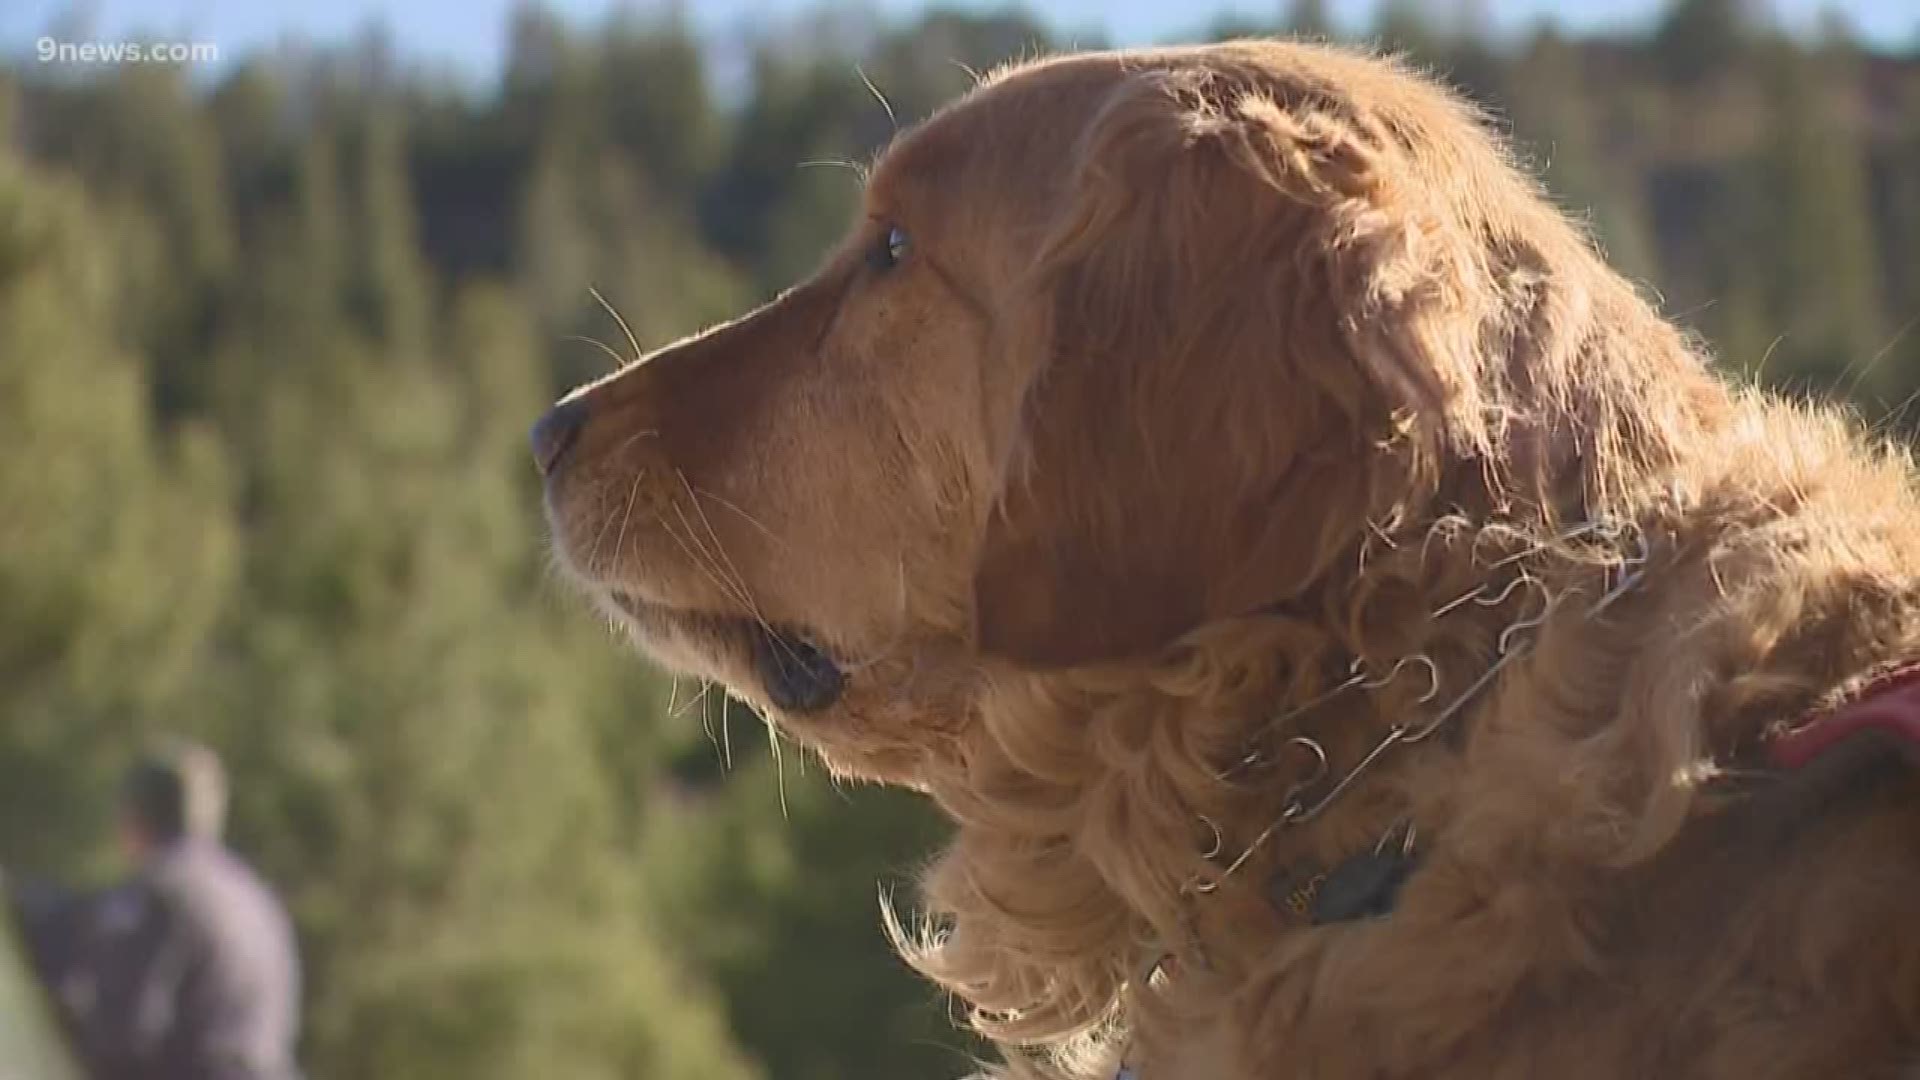 Nearly three dozen dogs from 16 ski areas are taking part in avalanche rescue training ahead of the upcoming Colorado ski season.